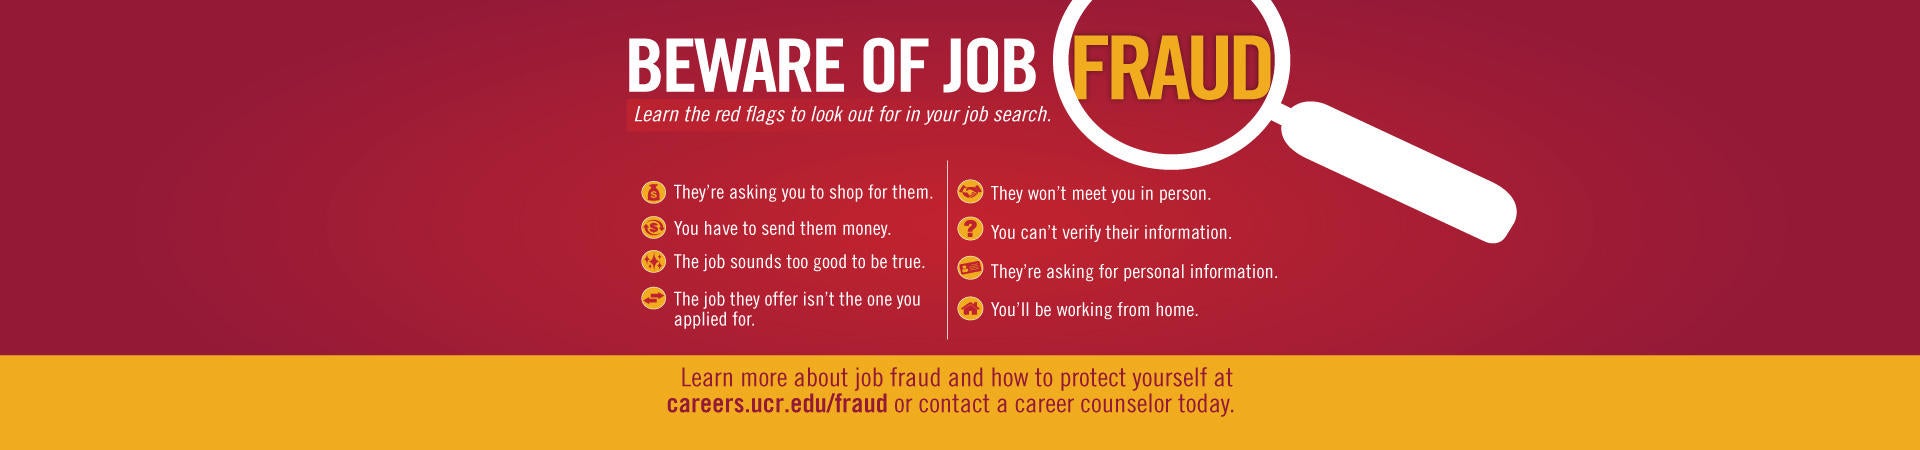 Learn more about job fraud and how to protect yourself at careers.ucr.edu/fraud